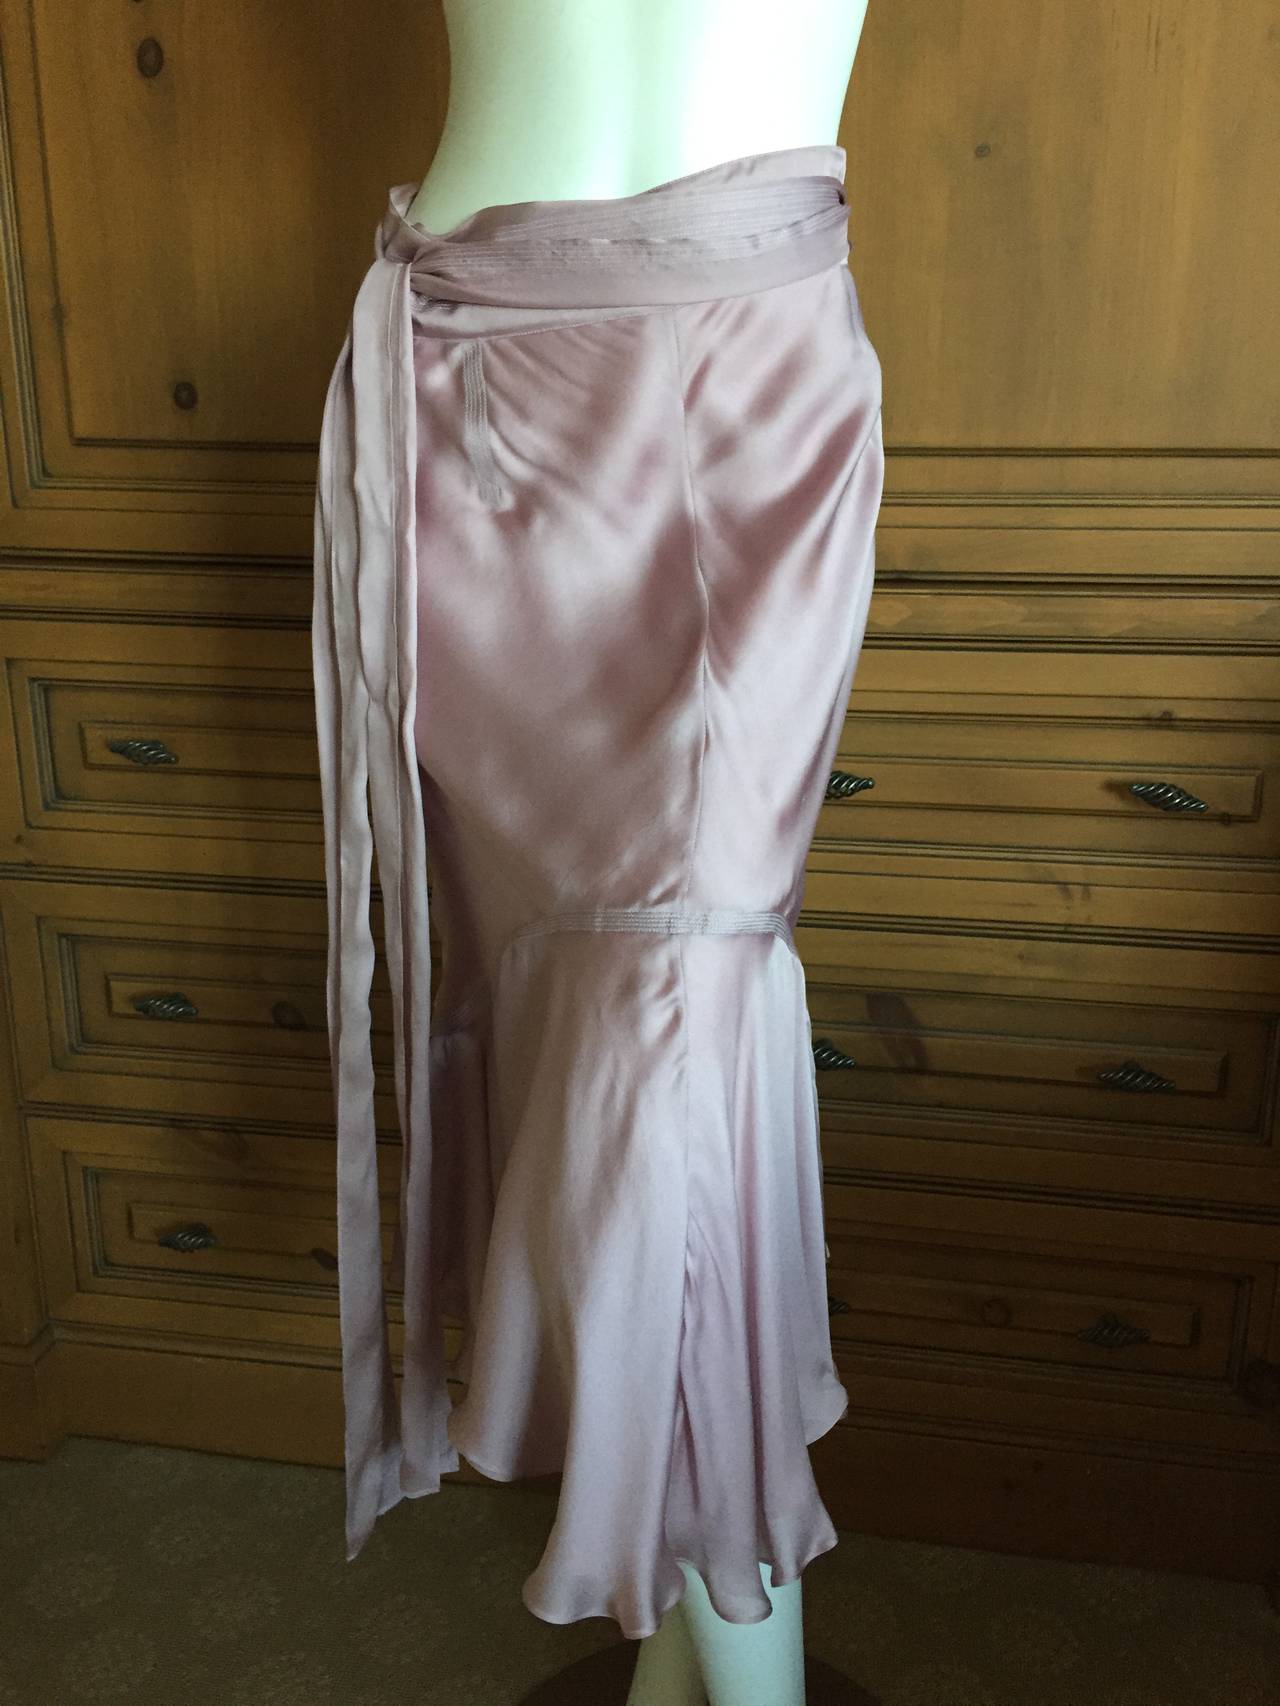 YSL by Tom Ford 2002 Lilac Silk Skirt & Top w Poet Sleeves 2